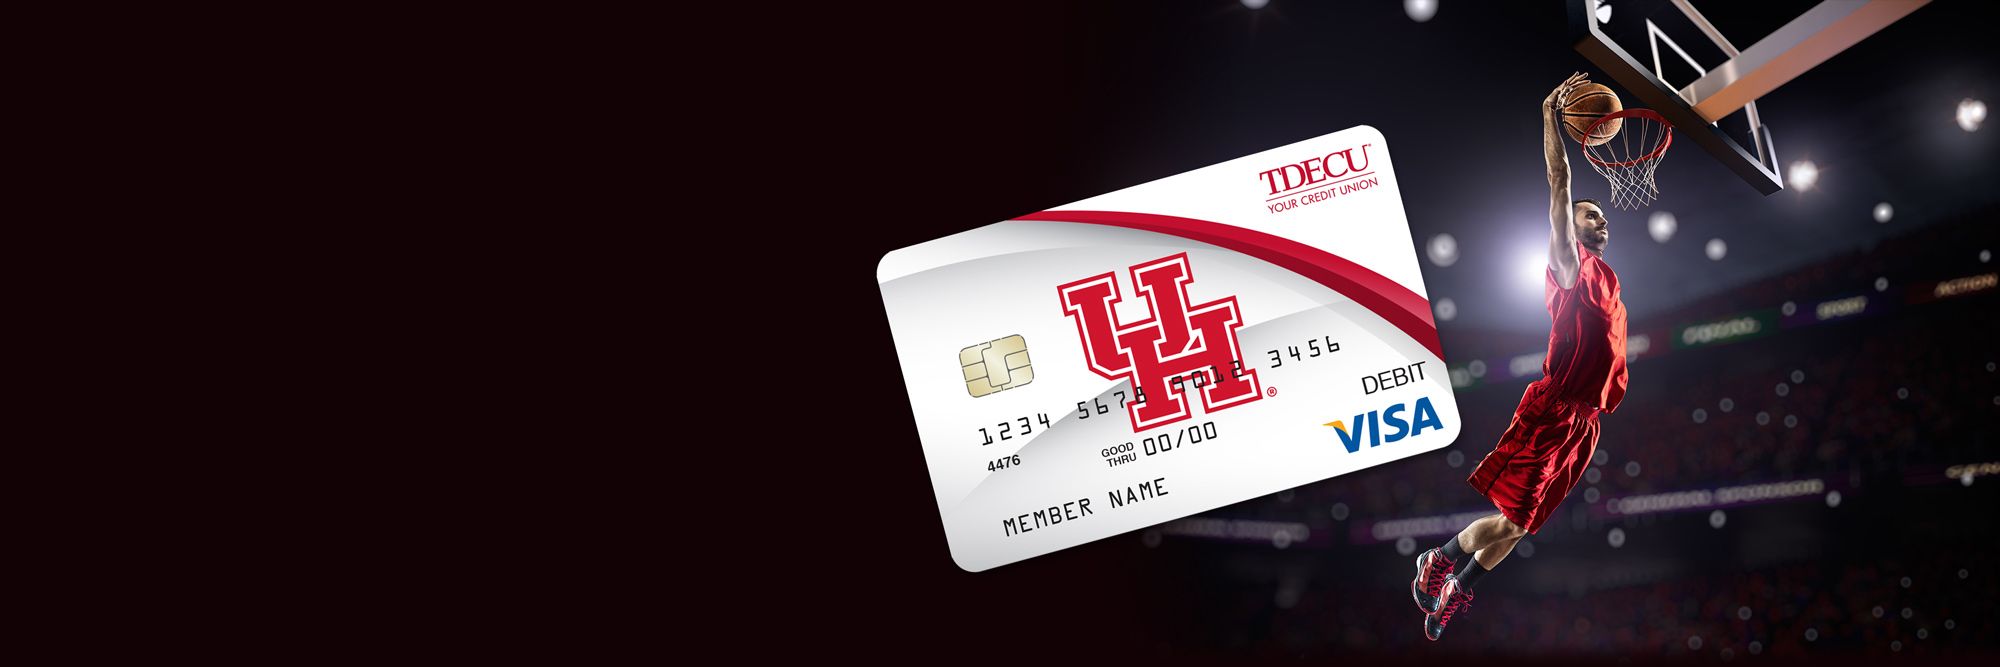 Bank like a champion with our exclusive card designed just for UH students.